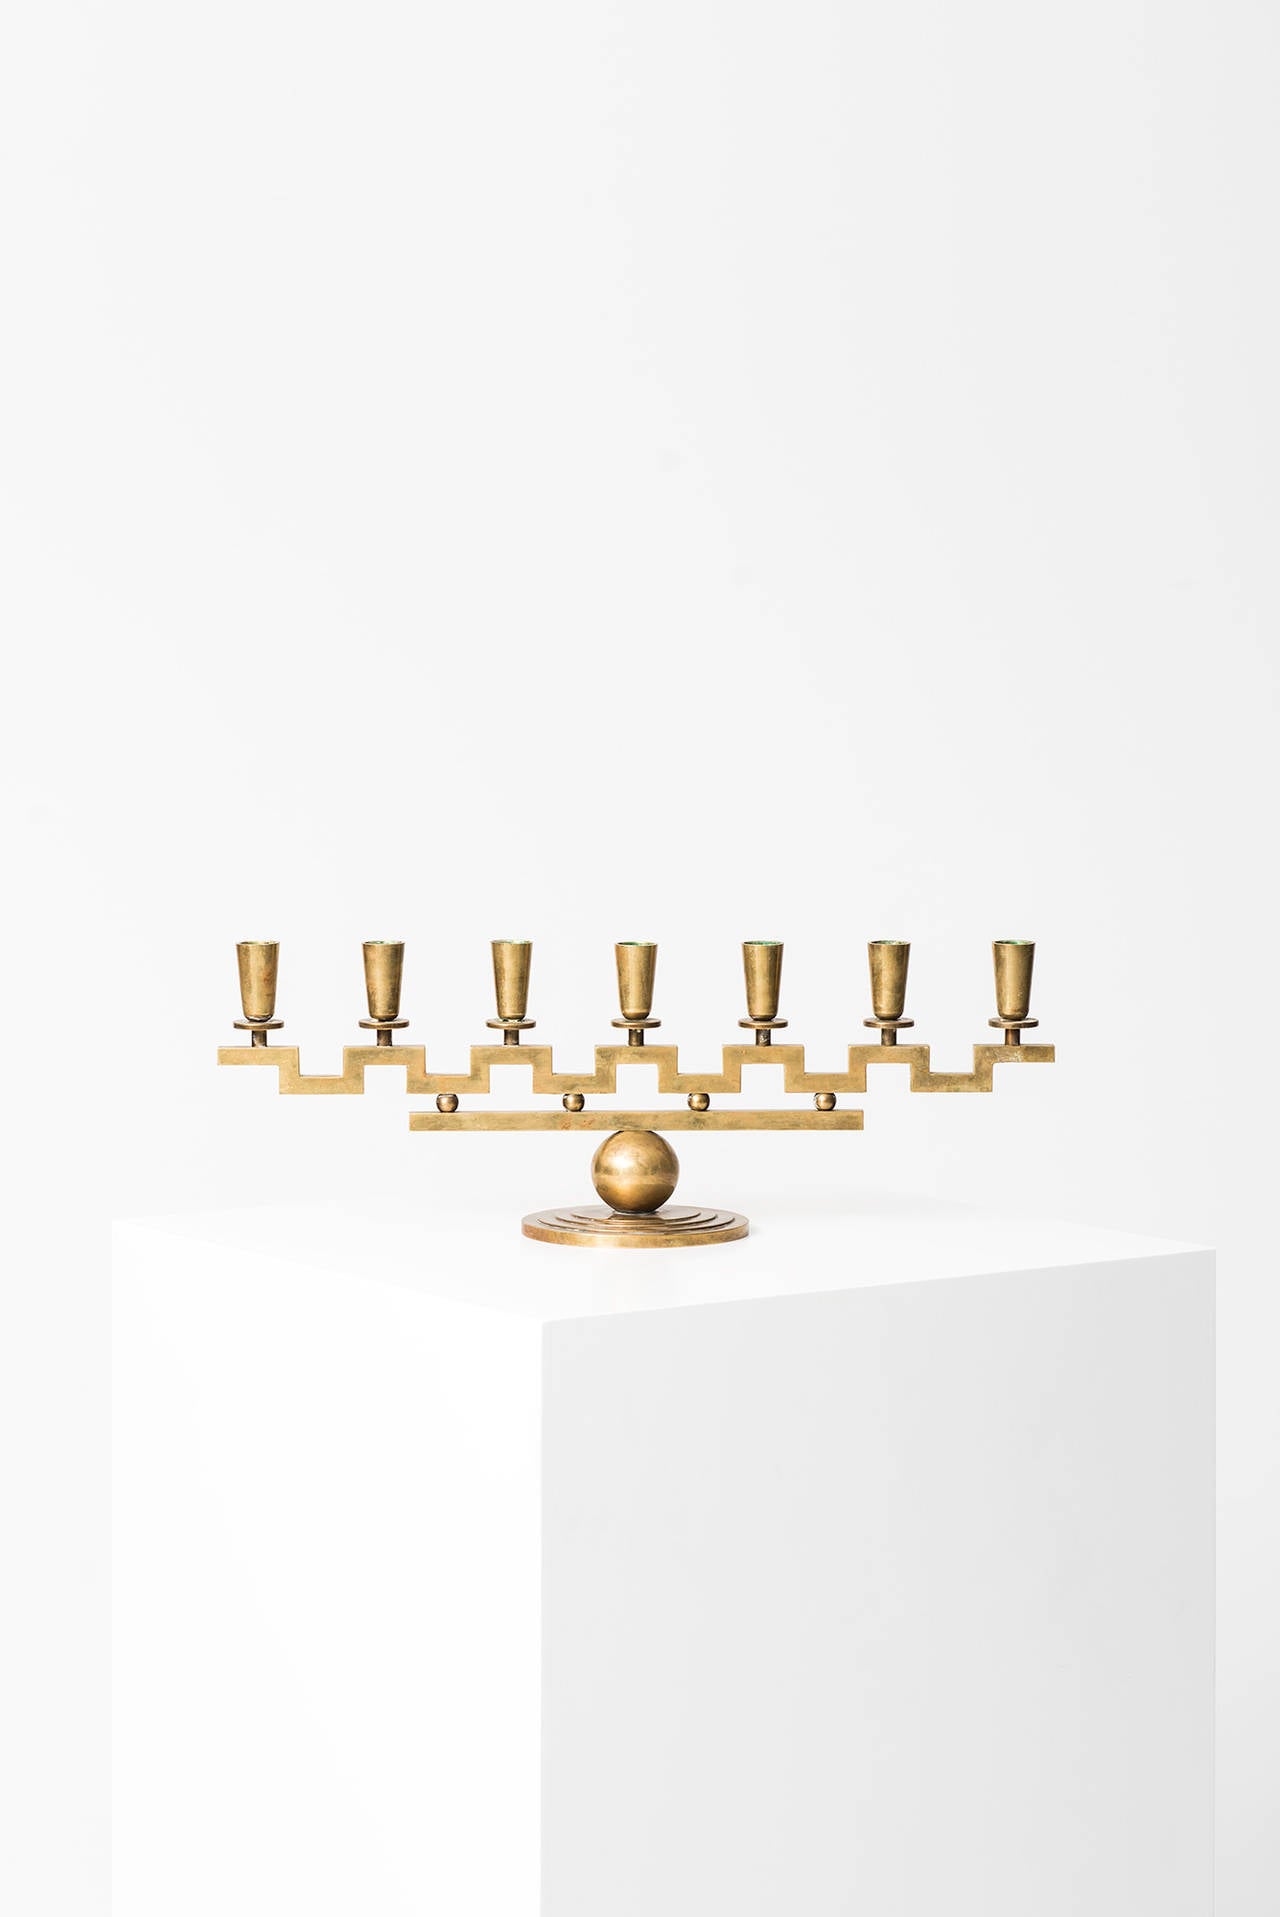 Rare candlestick designed by Lars Holmström. Produced in his own workshop in Arvika, Sweden.